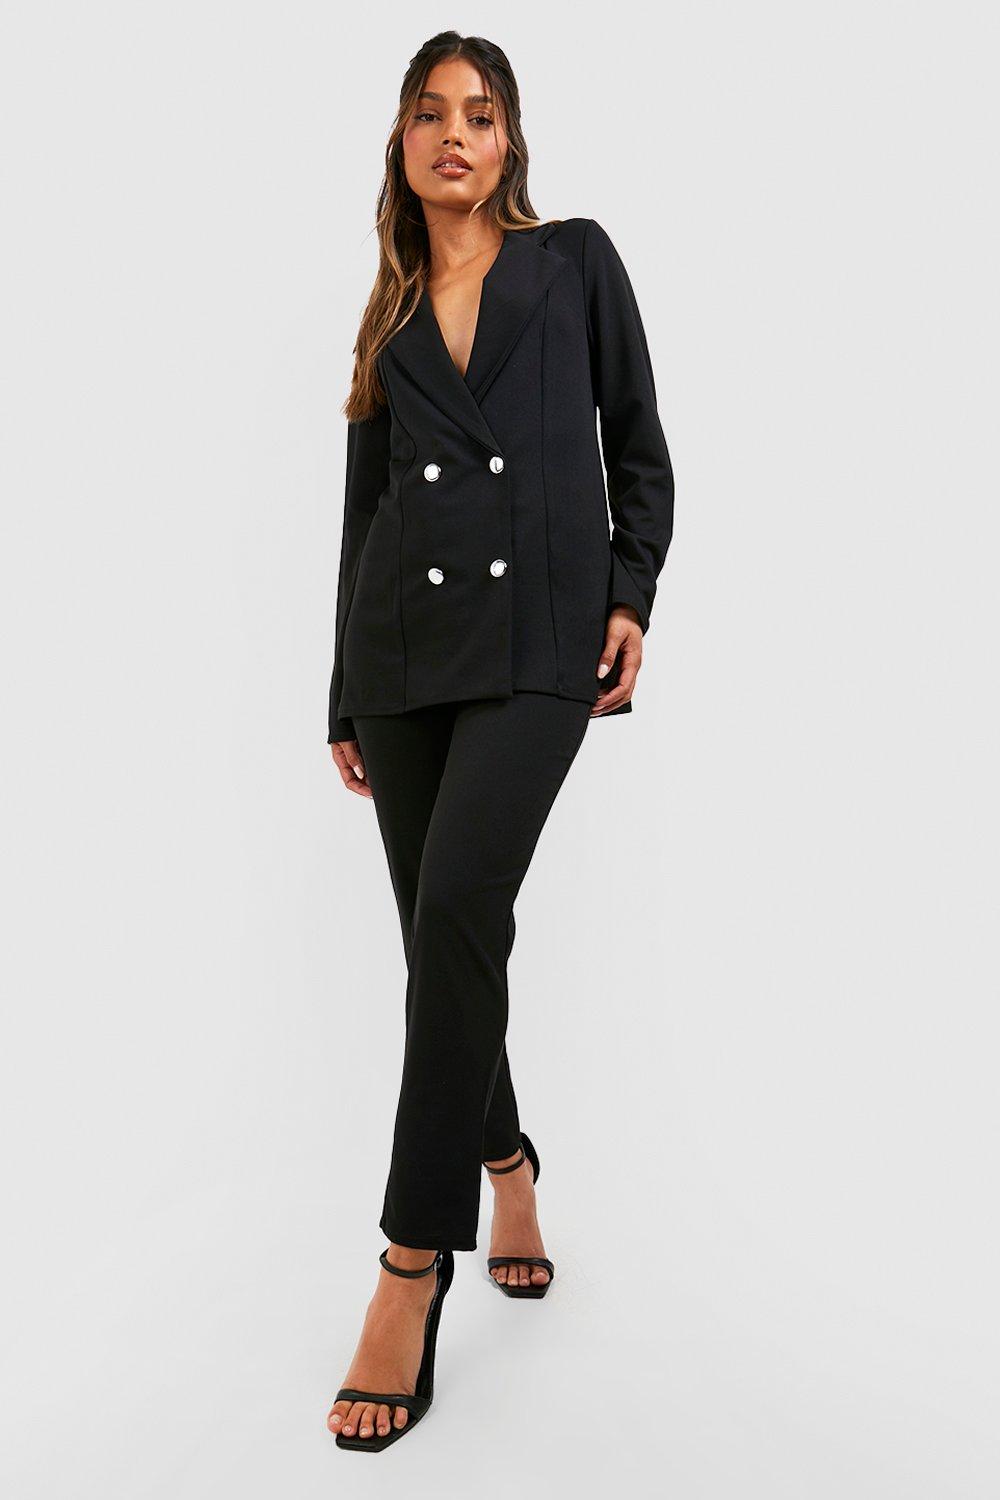 boohoo Women's Jersey Double Breasted Blazer And Trouser Suit Set|Size: 8|black